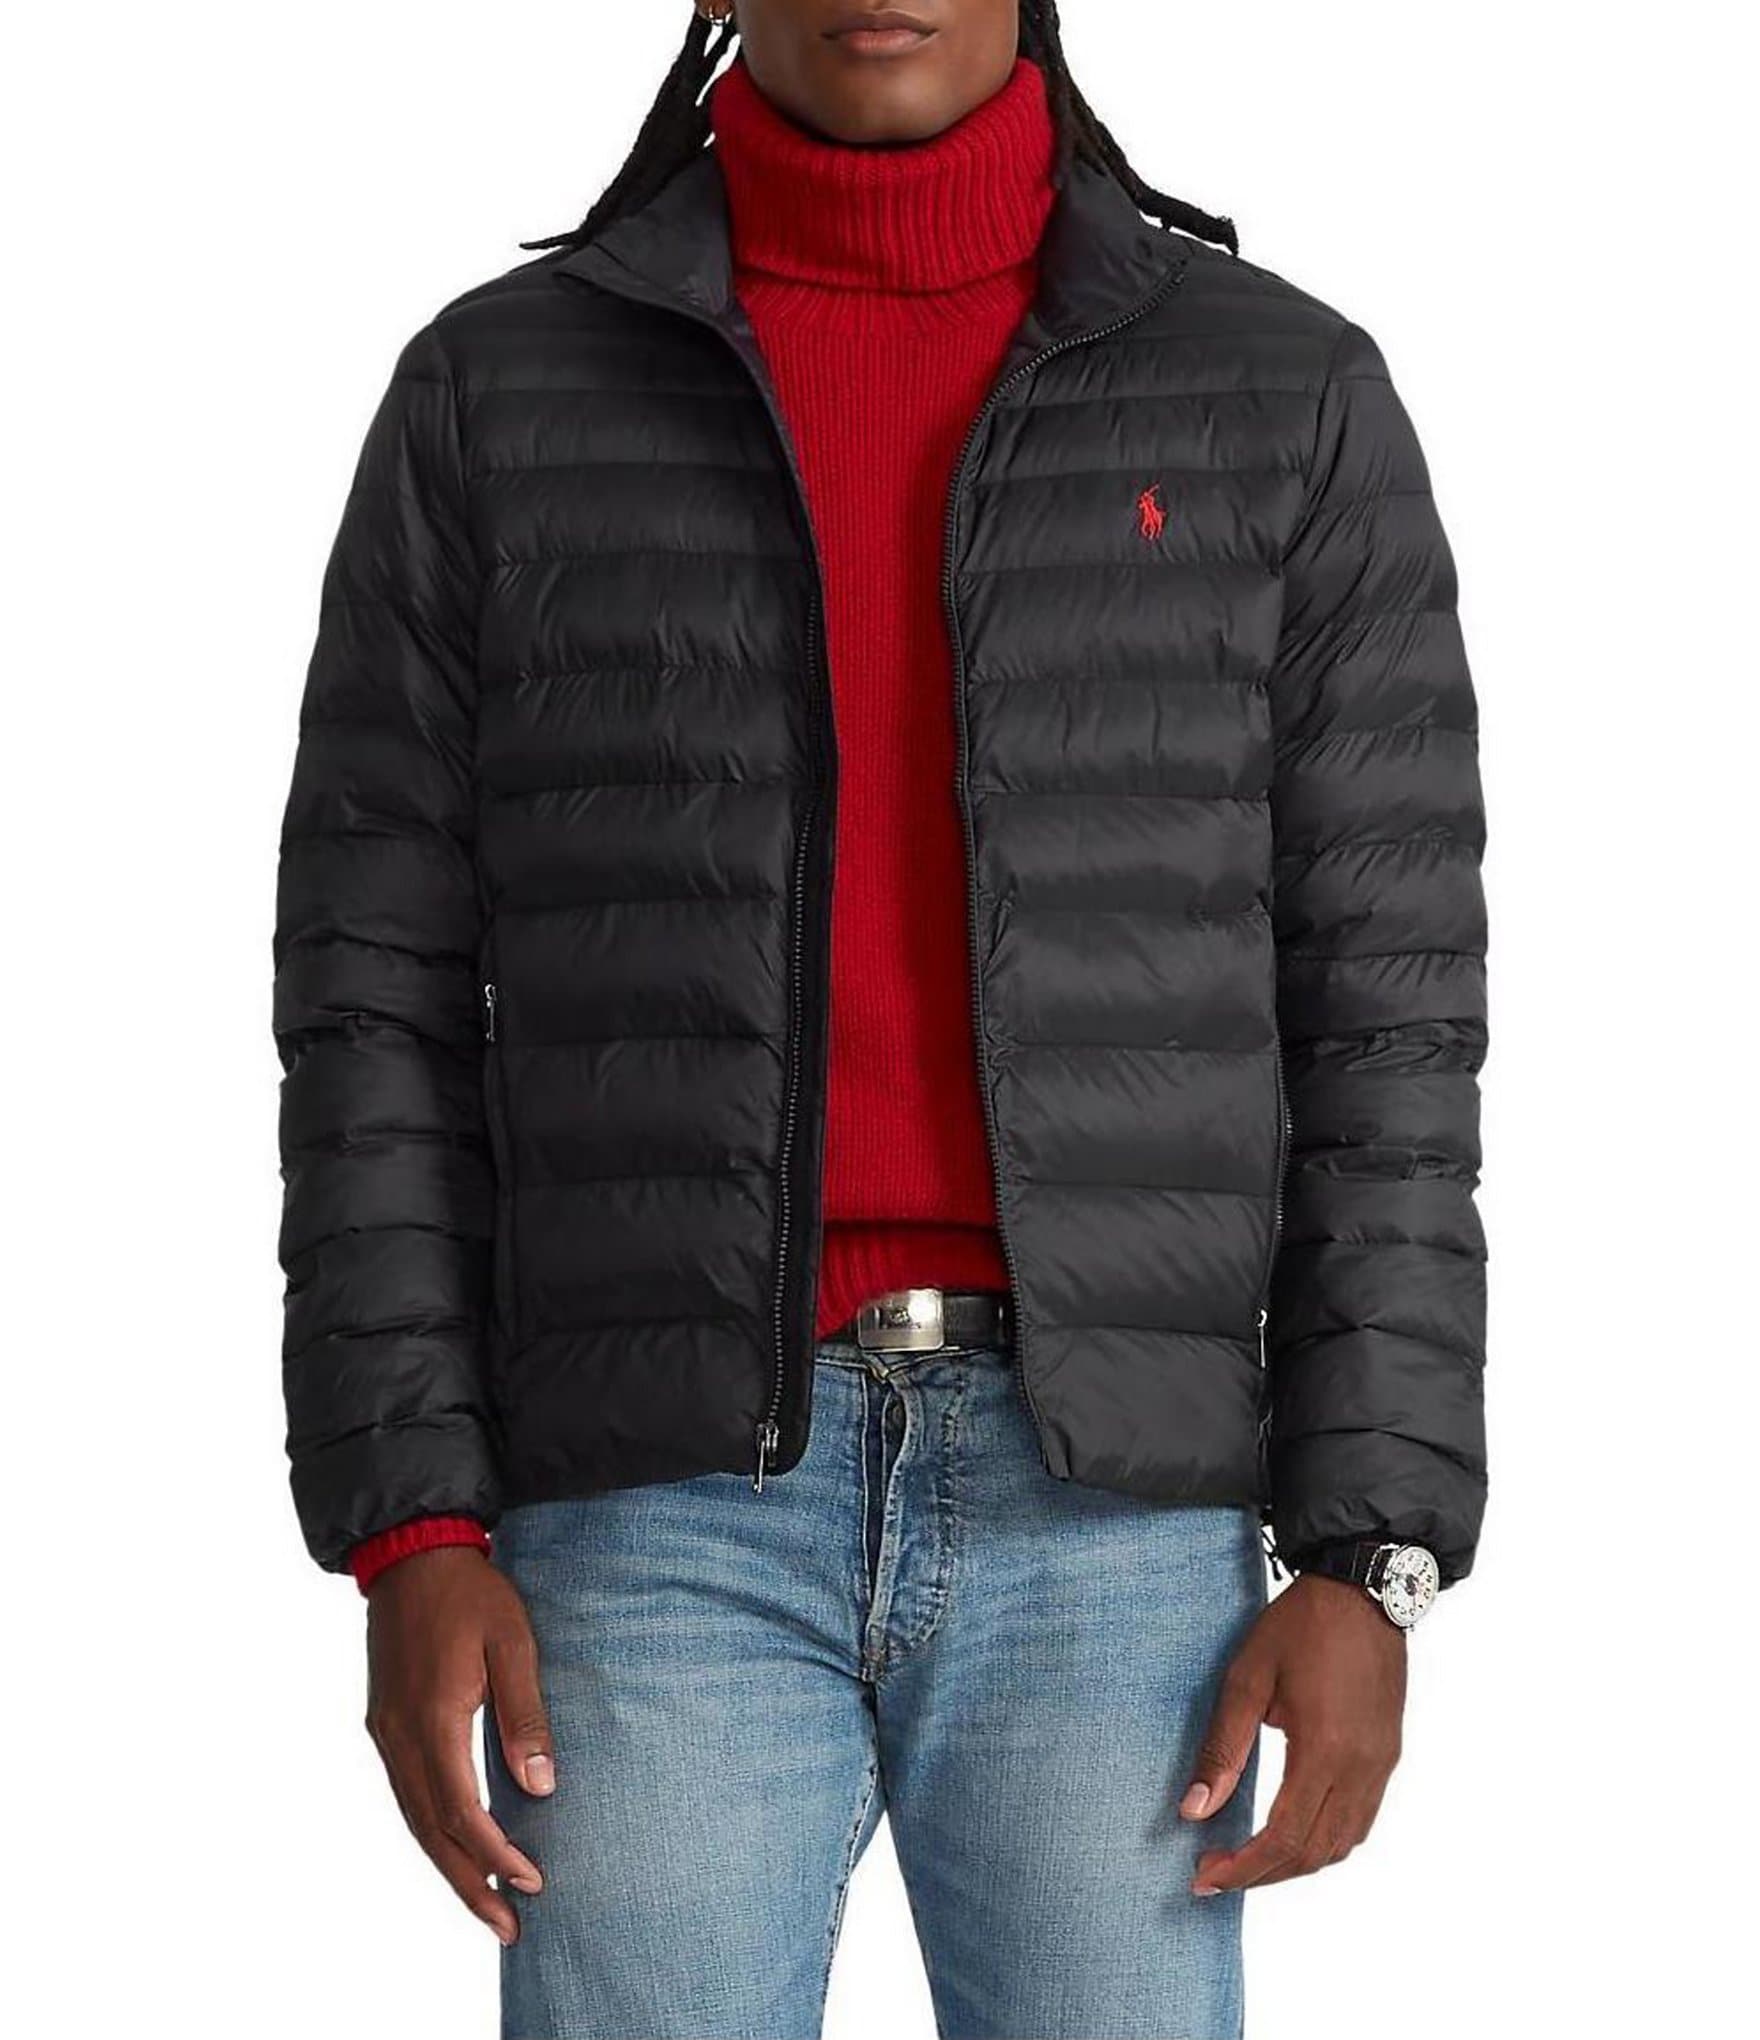 polo ralph lauren quilted